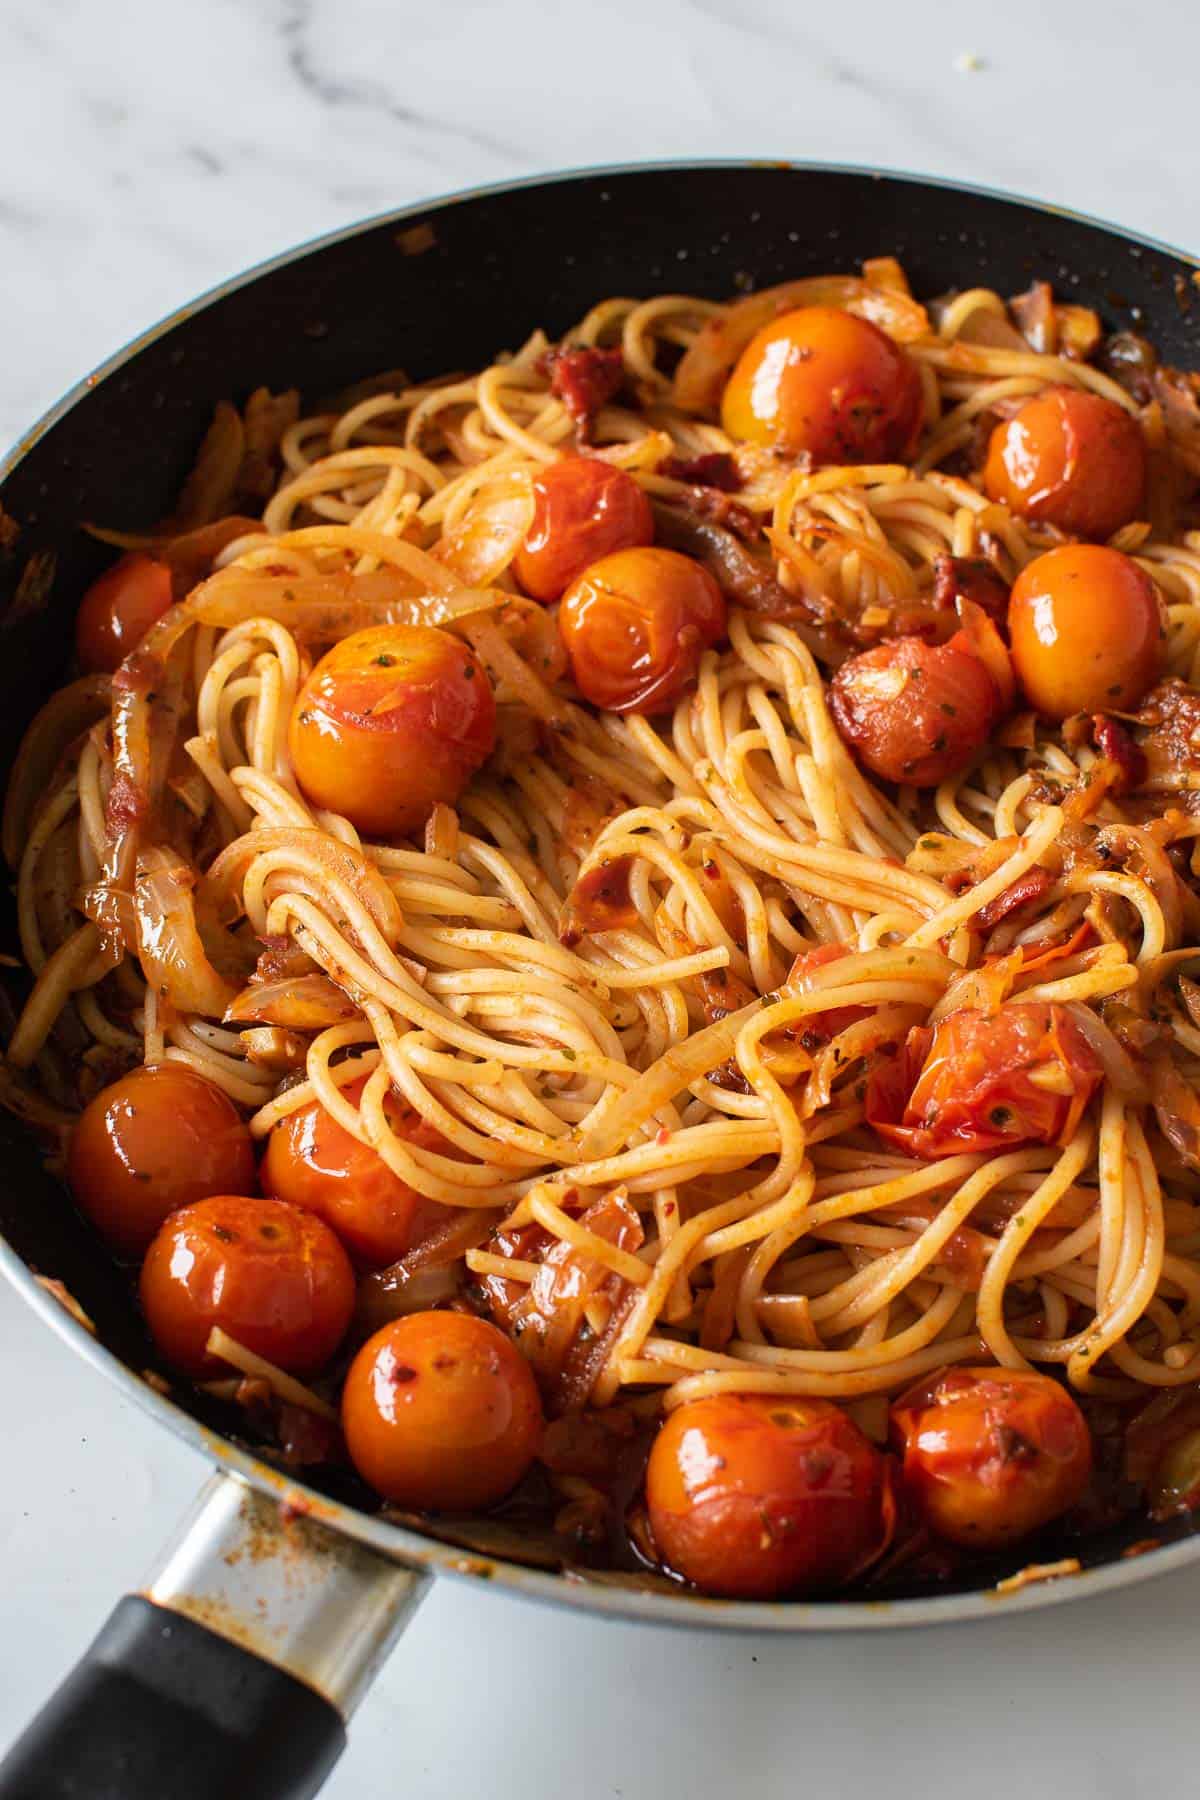 Harissa and tomato spaghetti in a frying pan.